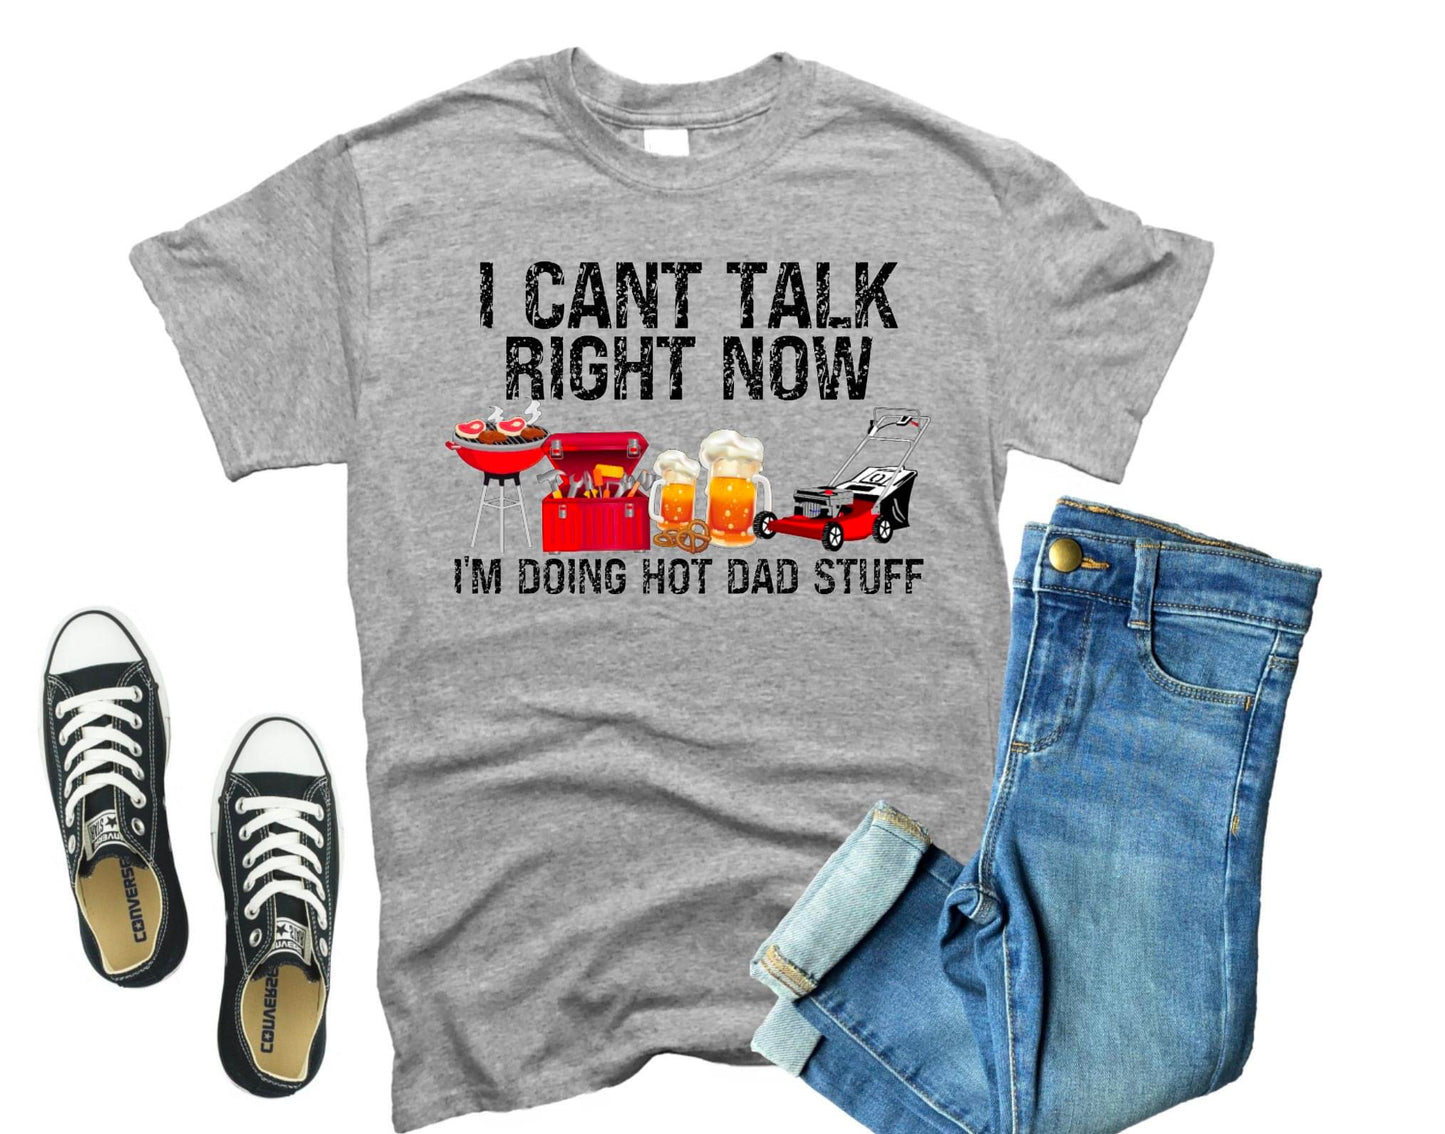 Can’t Talk Right Now - Hot Dad Stuff || Father’s Day Shirt